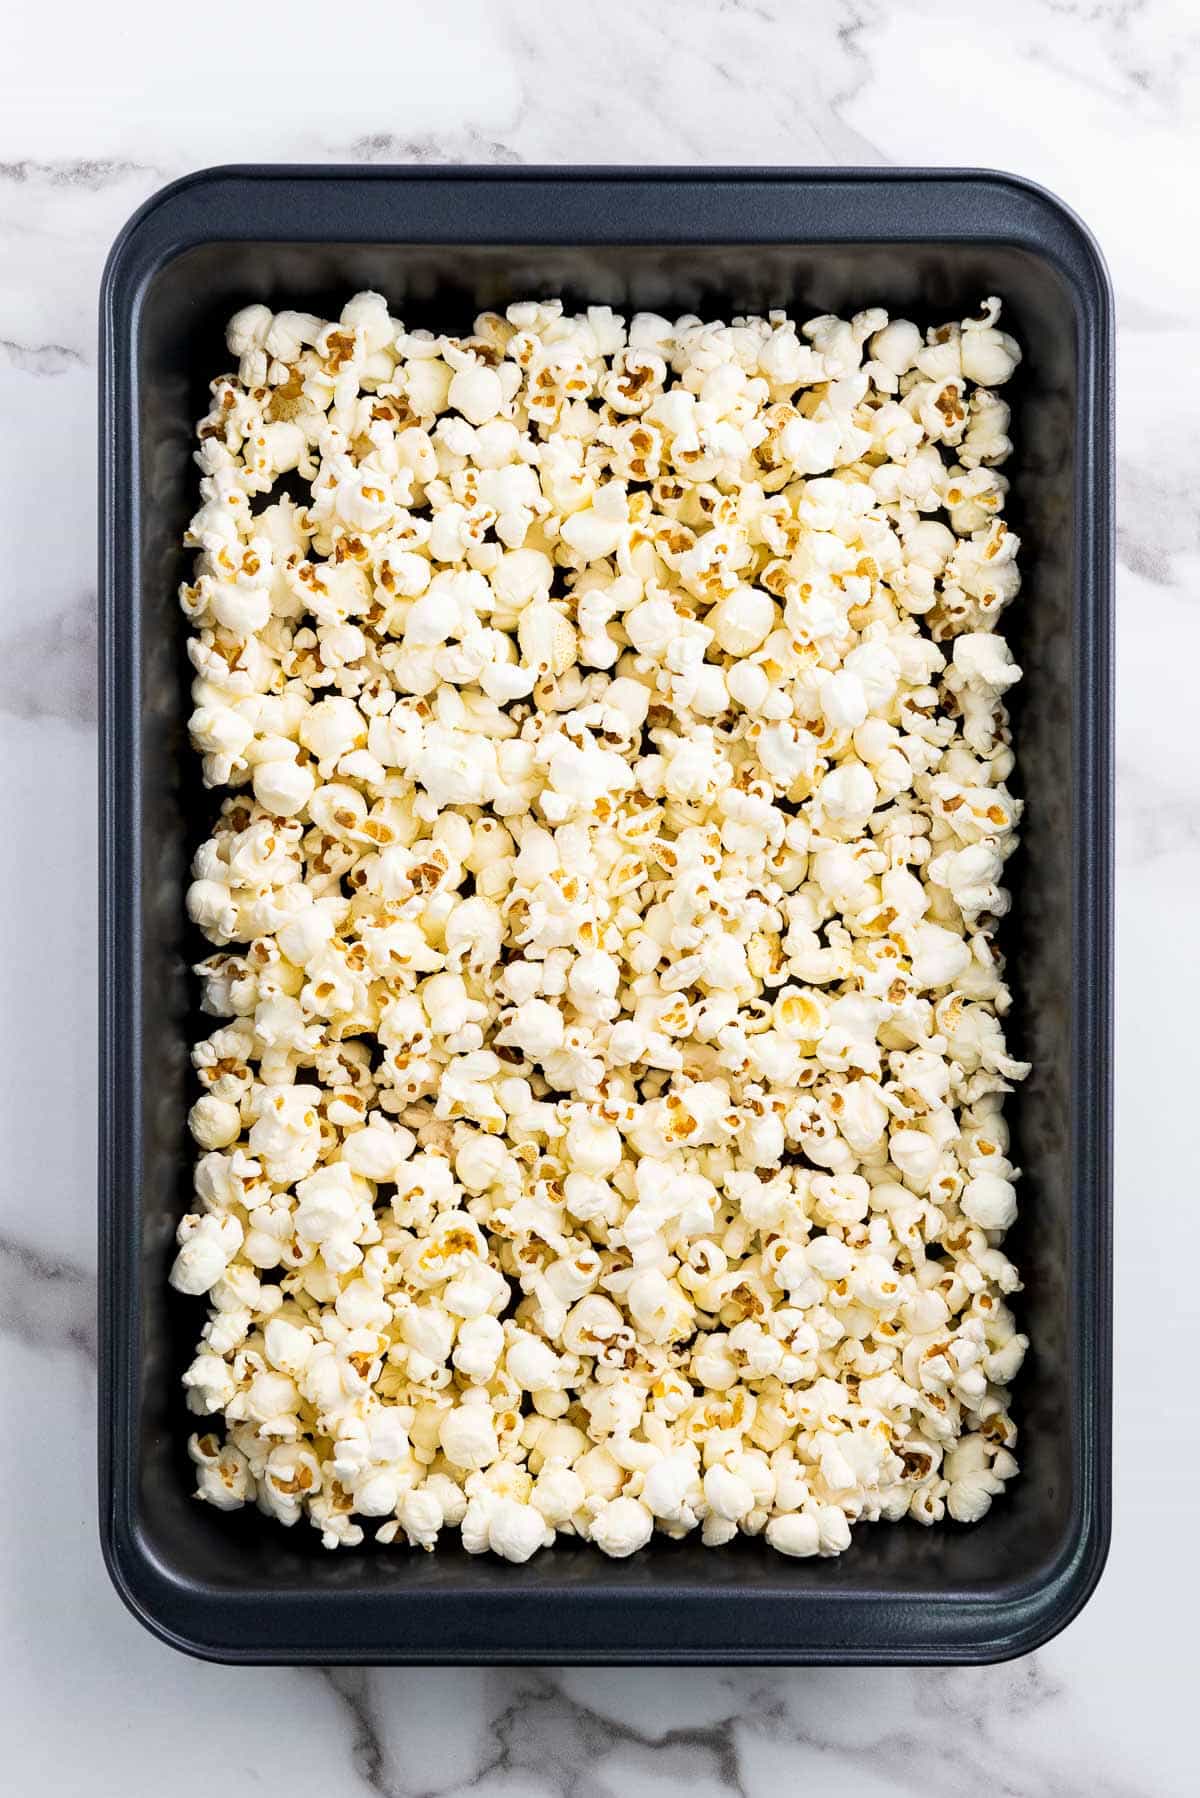 Popcorn in a black baking tray on top of a marble surface.